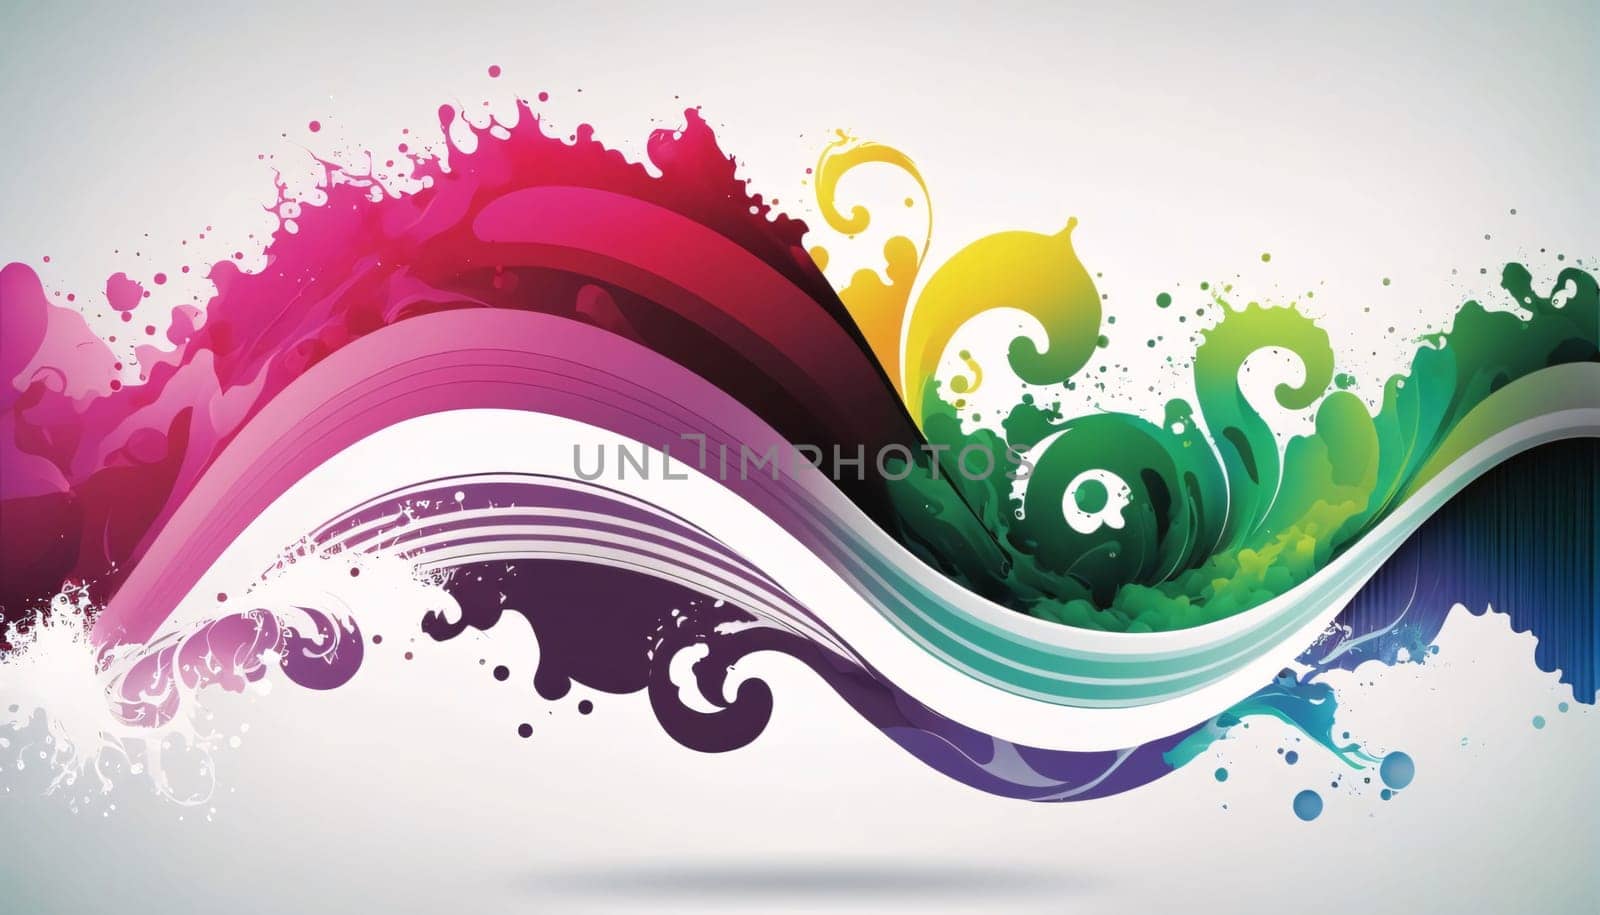 Banner: abstract colorful wave background, vector illustration eps10 file.